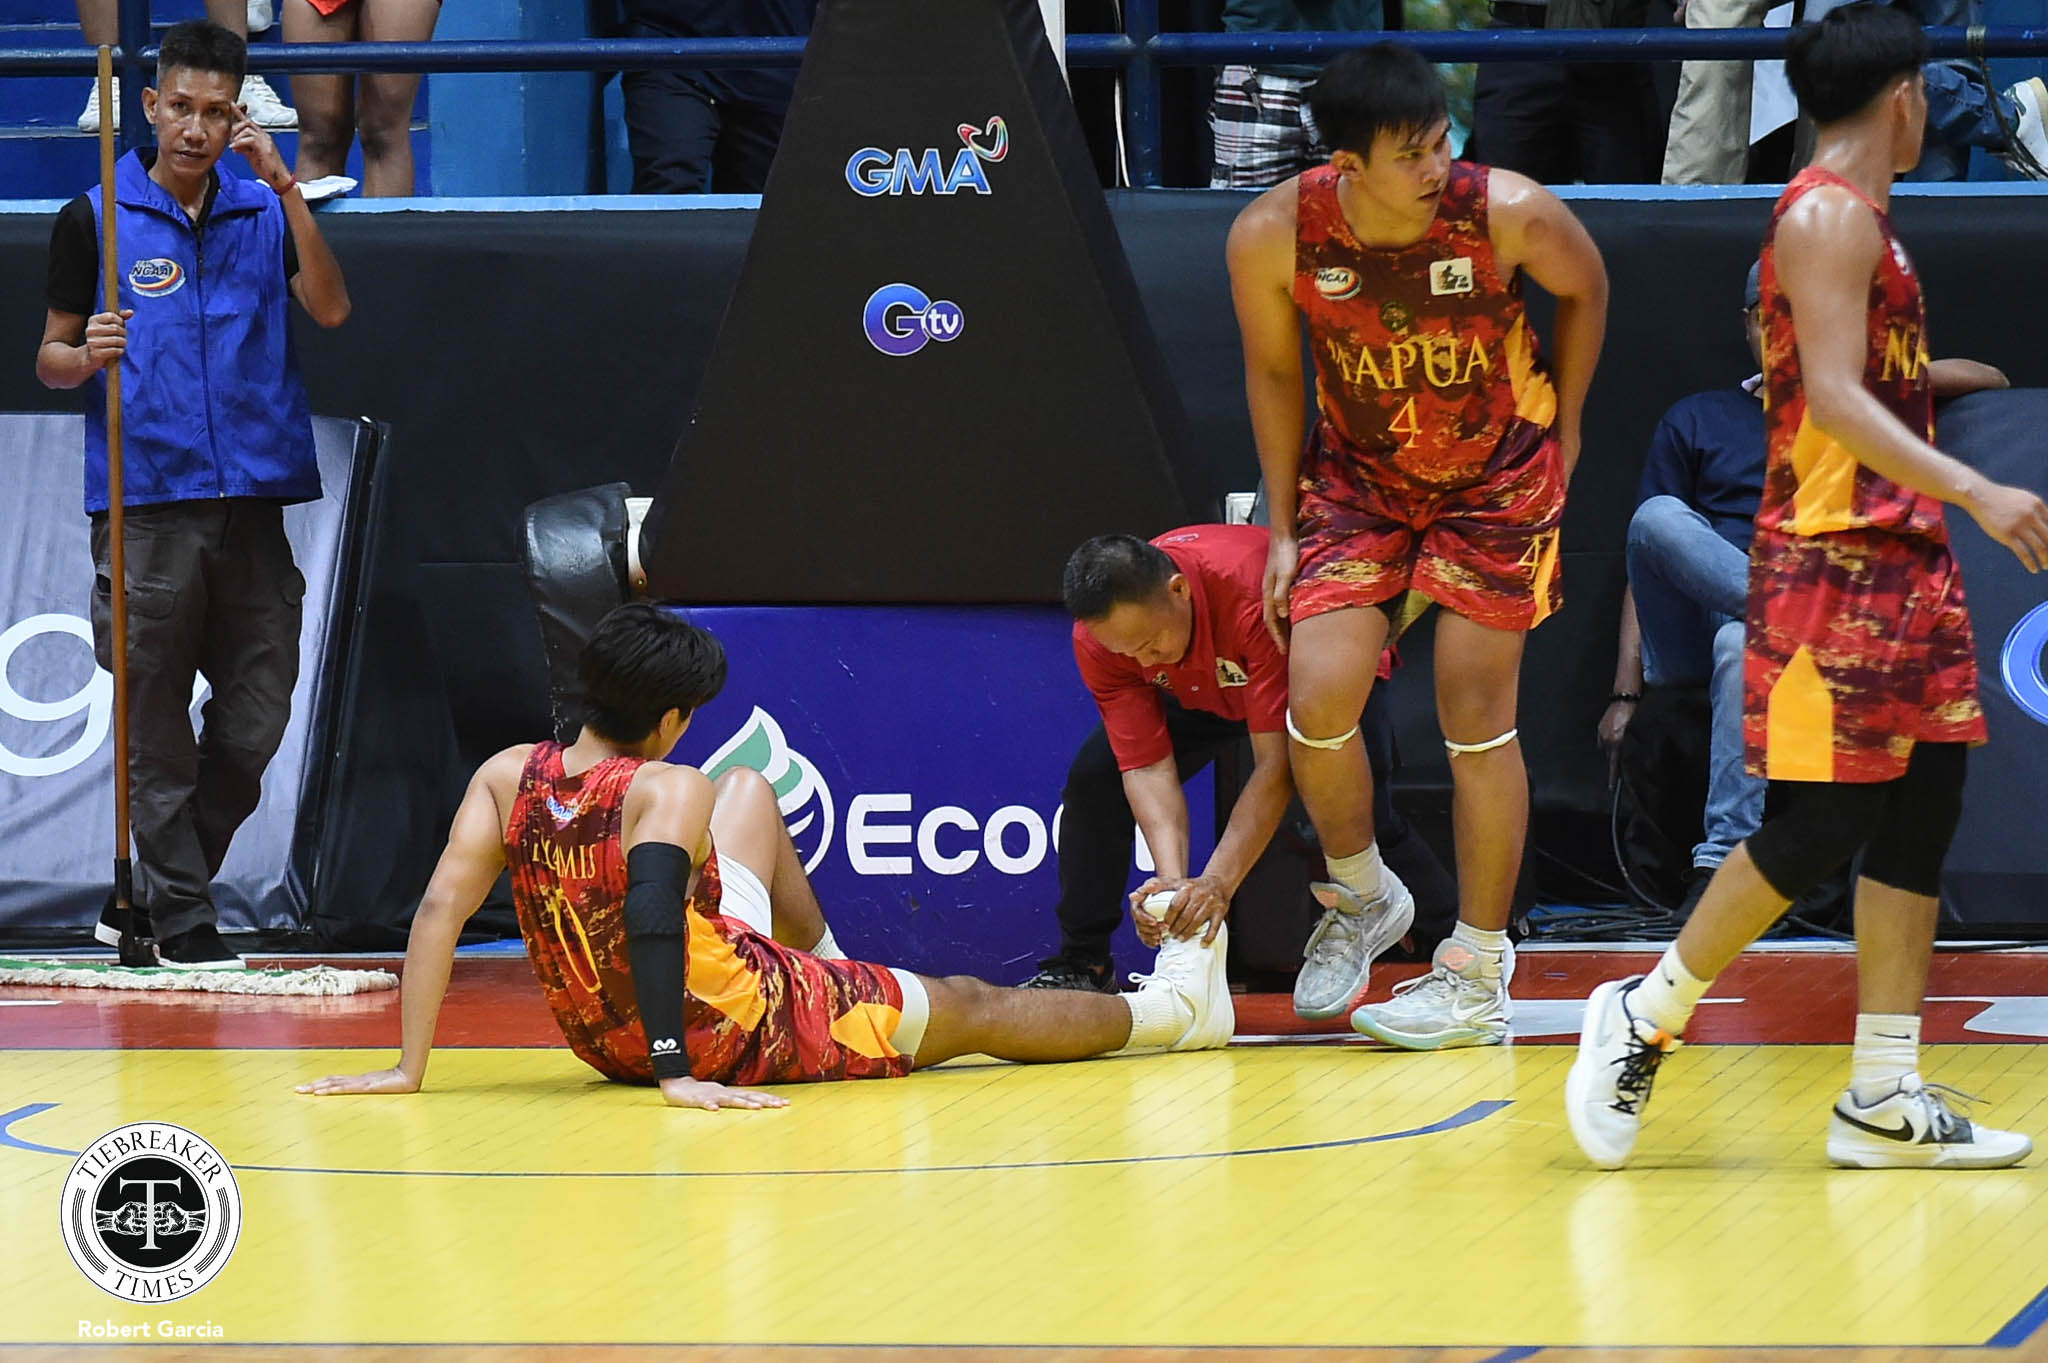 NCAA-99-SSCR-vs.-MU-Clint-Escamis-1 Clint Escamis feels right at home in NCAA Basketball MIT NCAA News  - philippine sports news